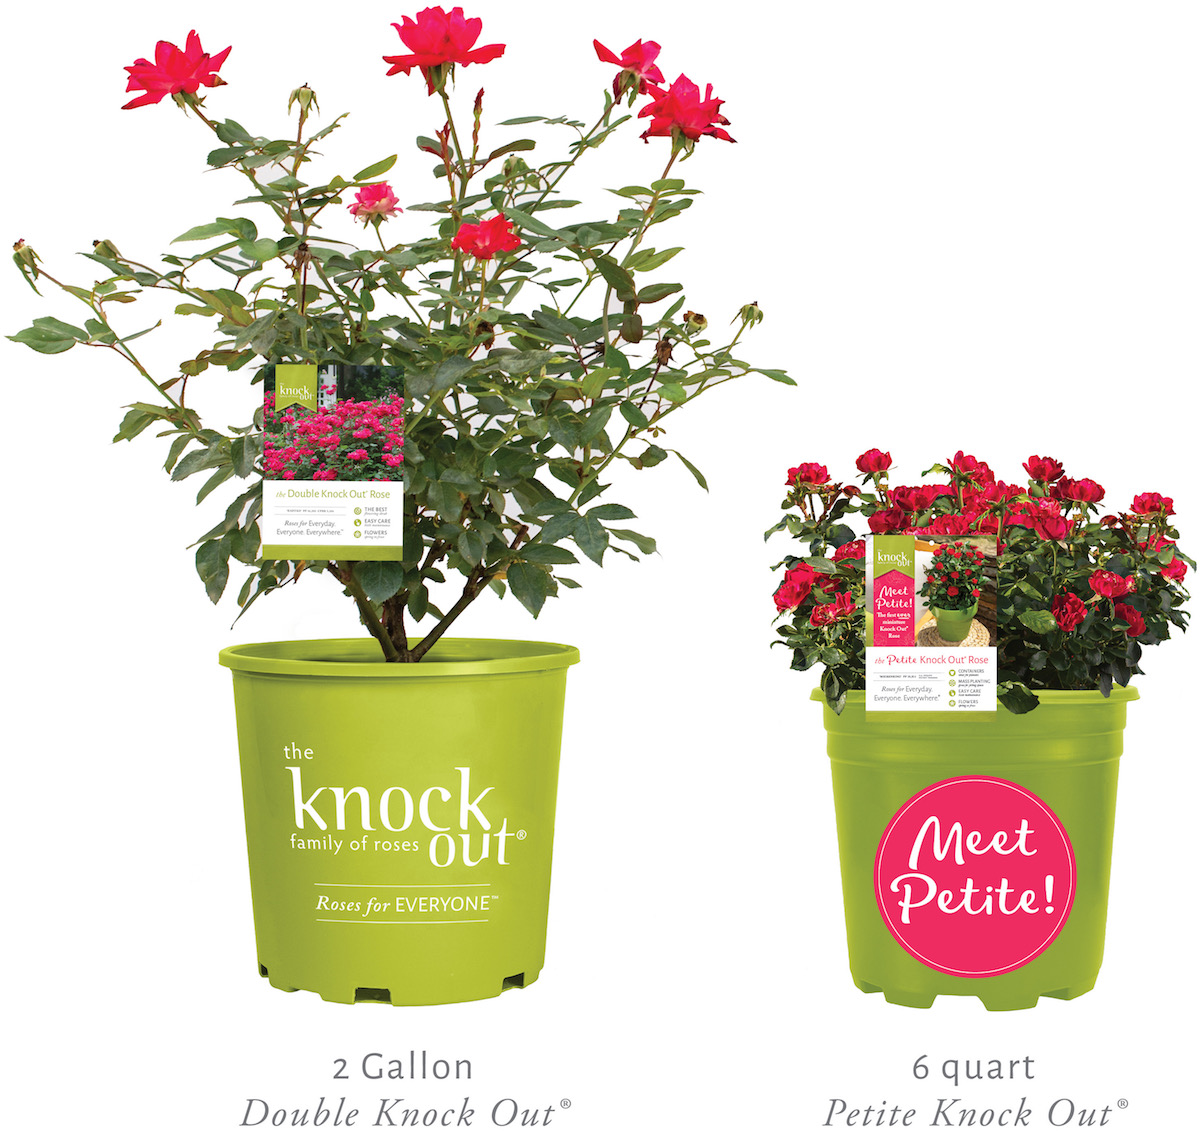 Petite Knock Out Rose Debuts - Greenhouse Product News